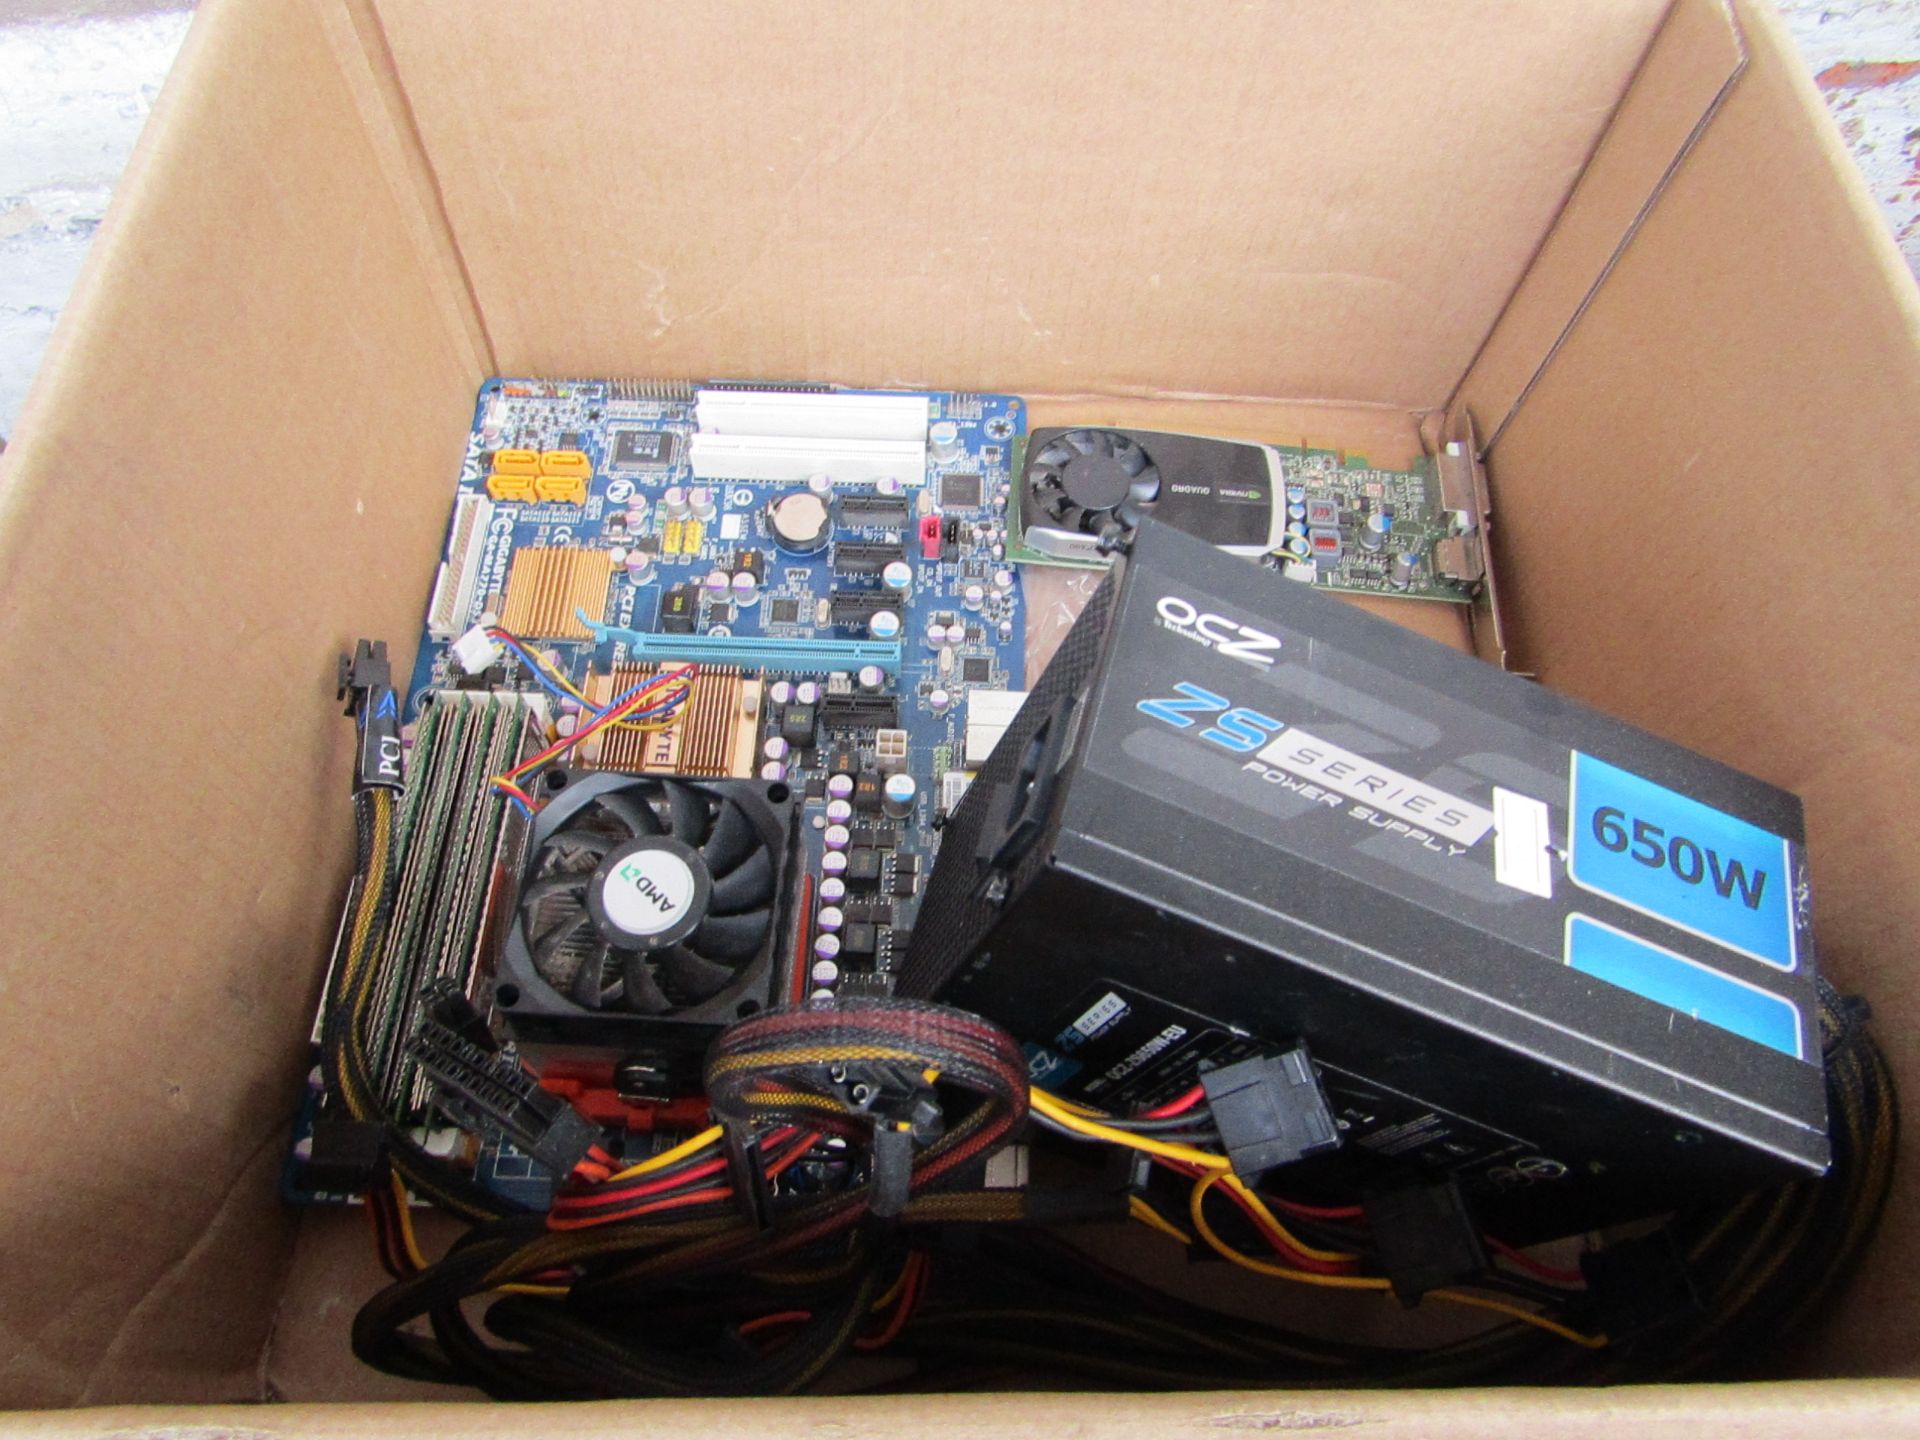 4x Various Computer Components Such as : Graphics Card, Power Supply, etc - See Image.